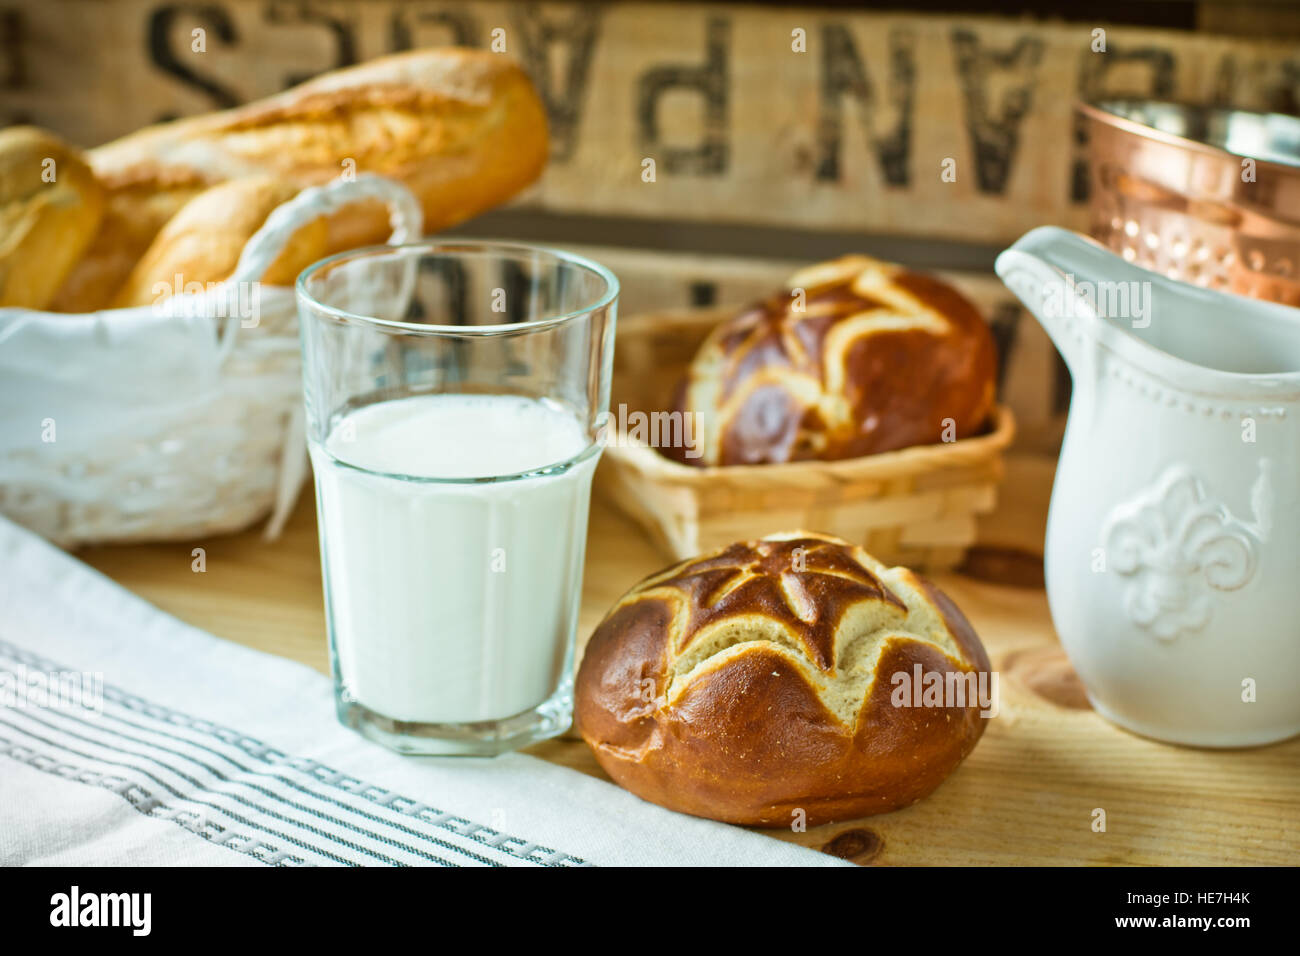 Fresh lye rolls in a wicker basket, a glass of milk, white pitcher on a wood table in a rustic style kitchen interior Stock Photo